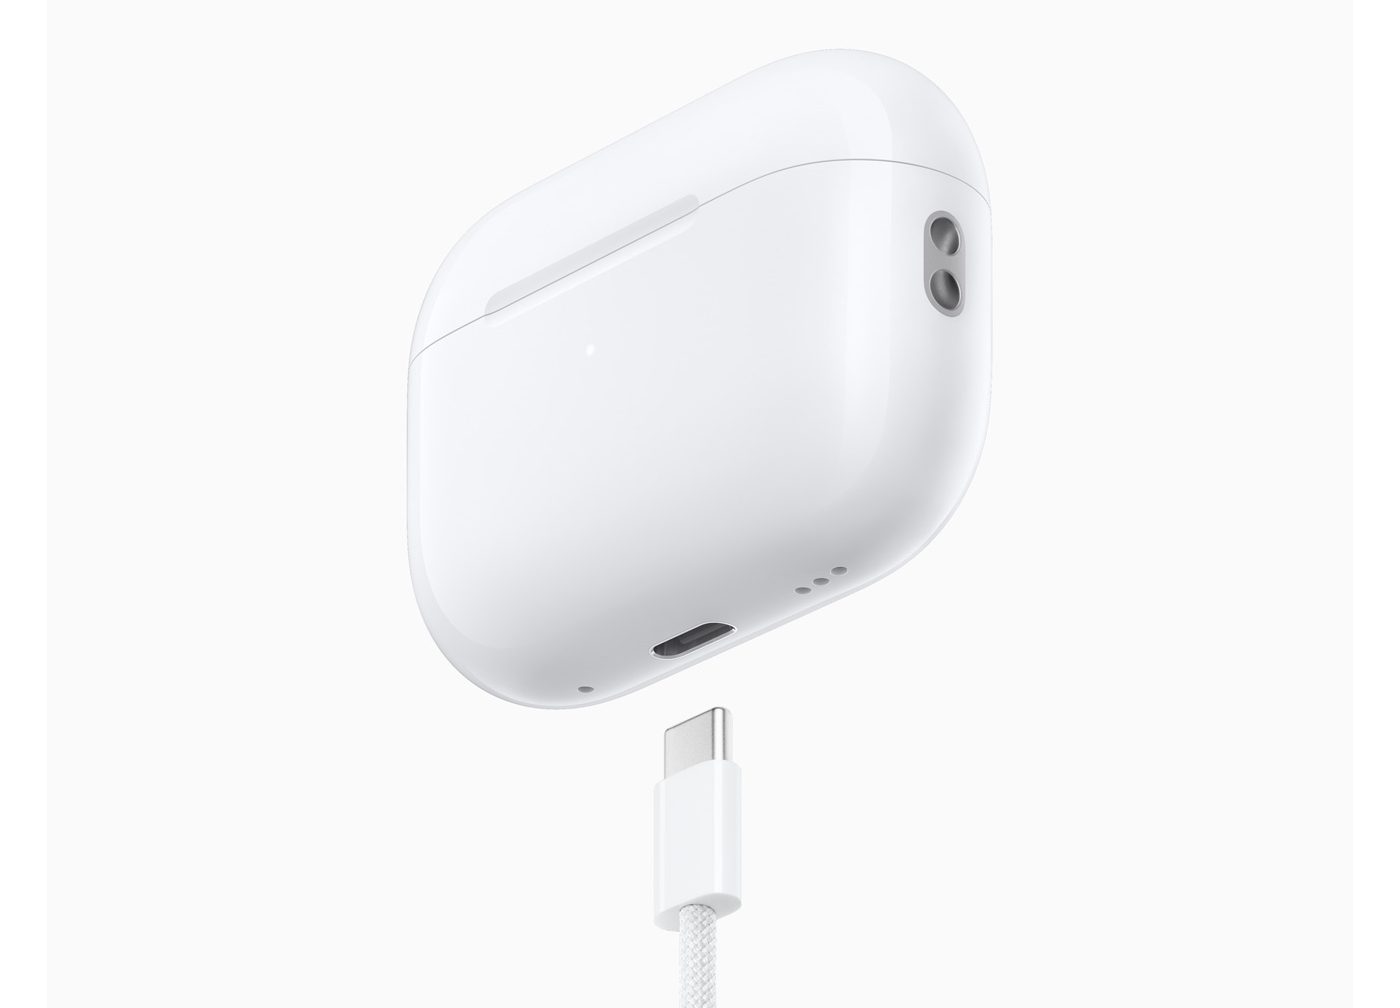 Vision Pro Lossless Airpods Pro 2